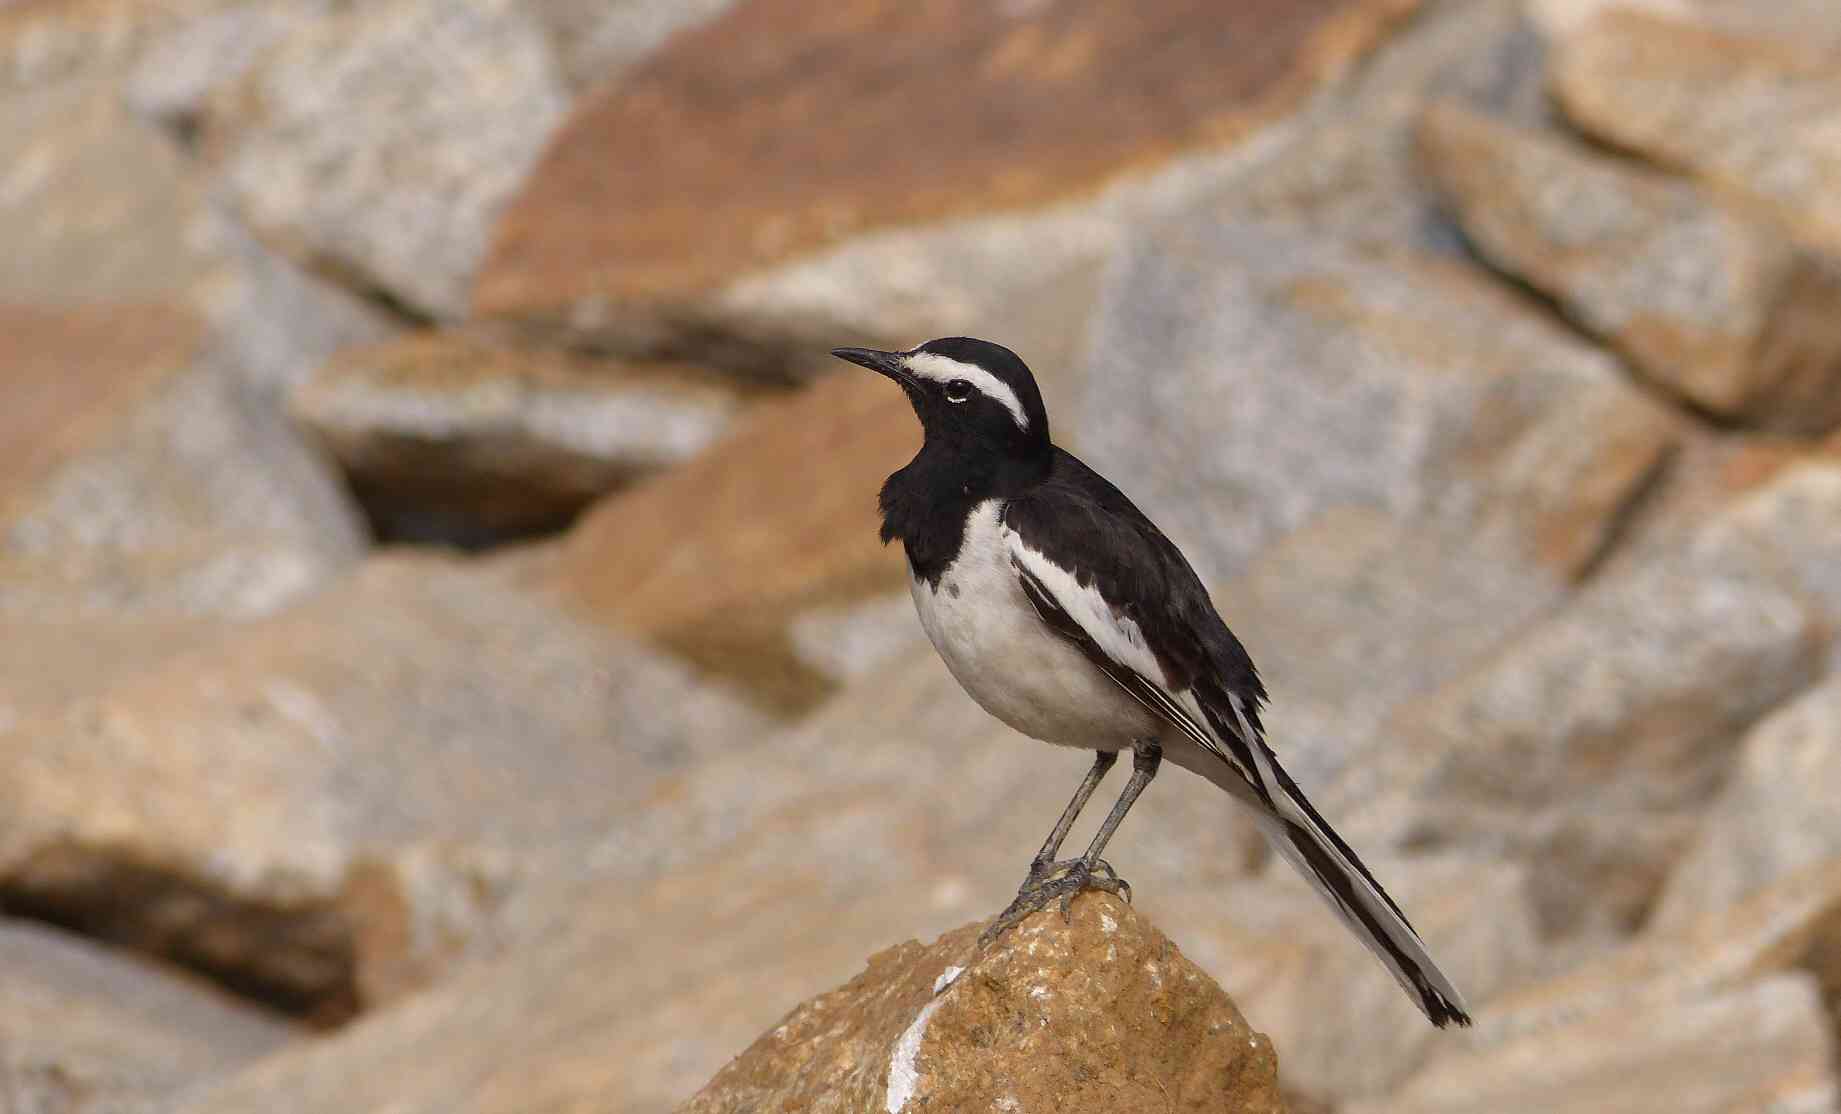 A White-browed Wagtail is a really striking bird